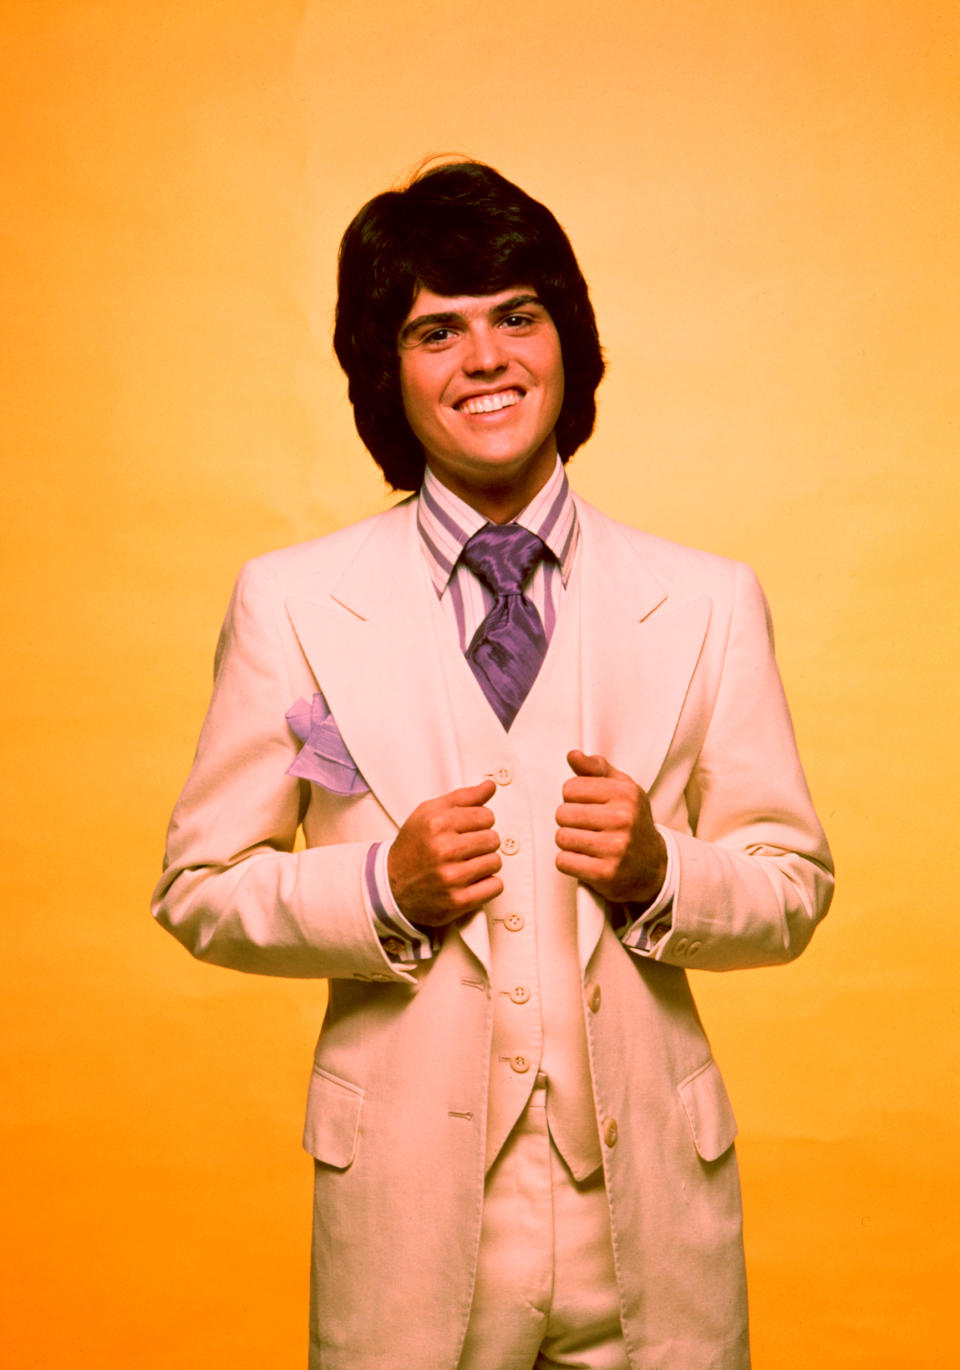 Donny Osmond was a teen idol of the '70s. (Photo: Everett Collection)